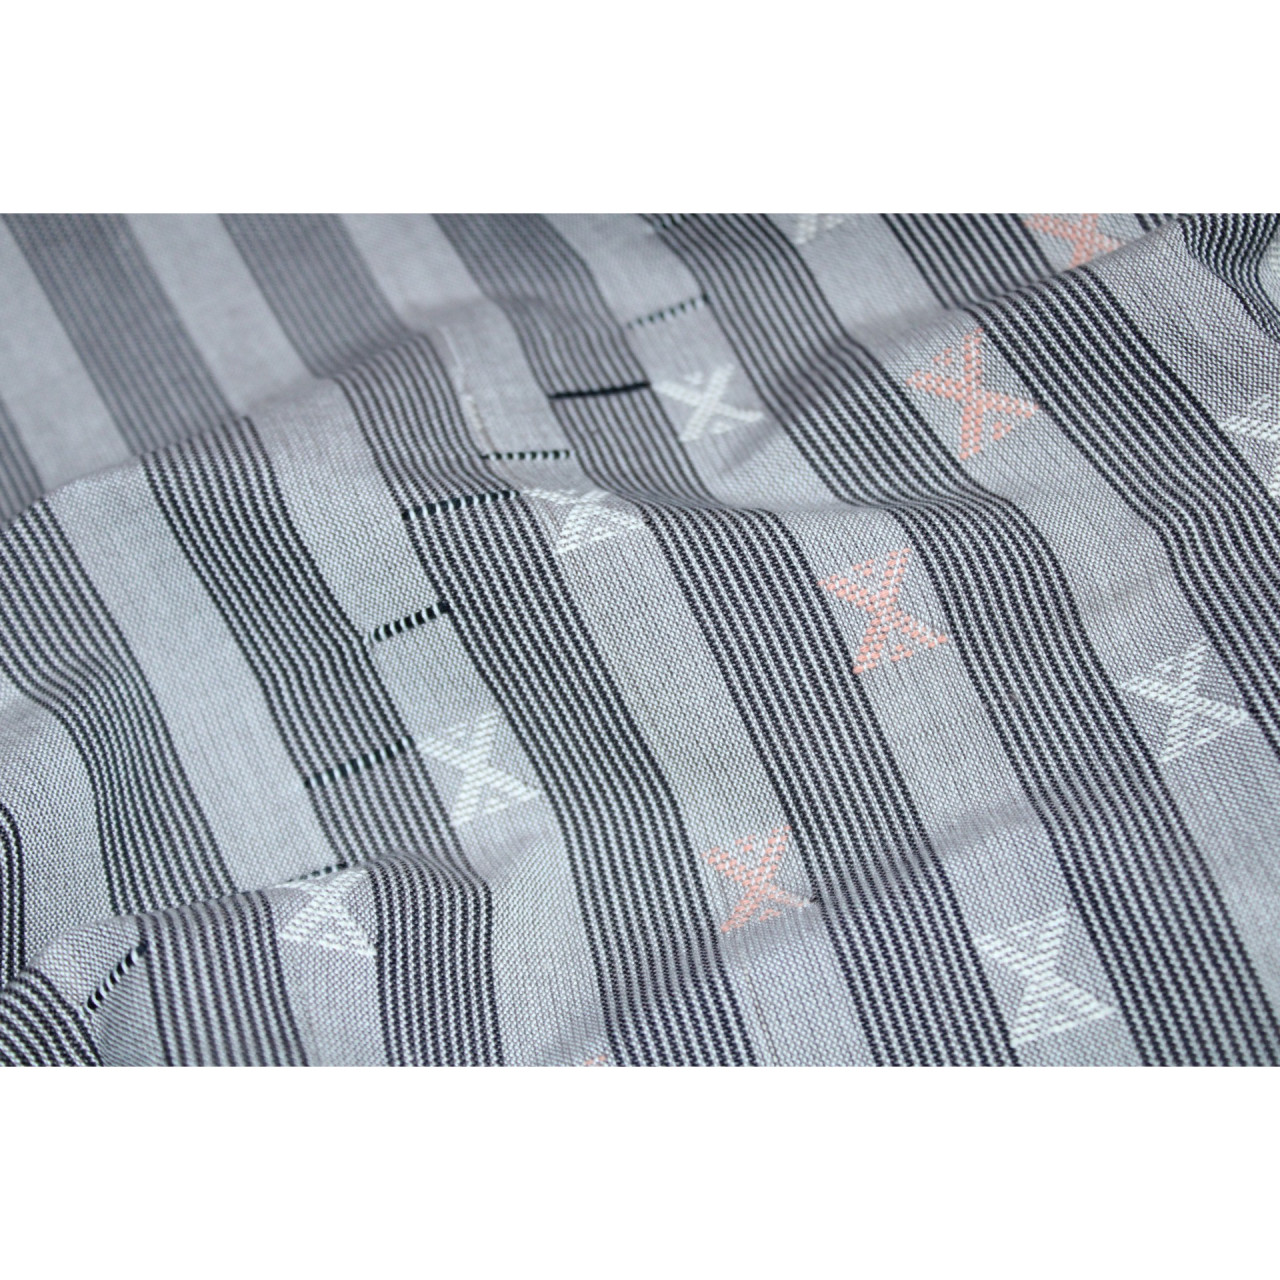 (2153) Cotton Azo-free dyed Kutchy stole from Kutch with cotton motifs and cotton motifs - Grey, black, white, stripes, motif, pompoms